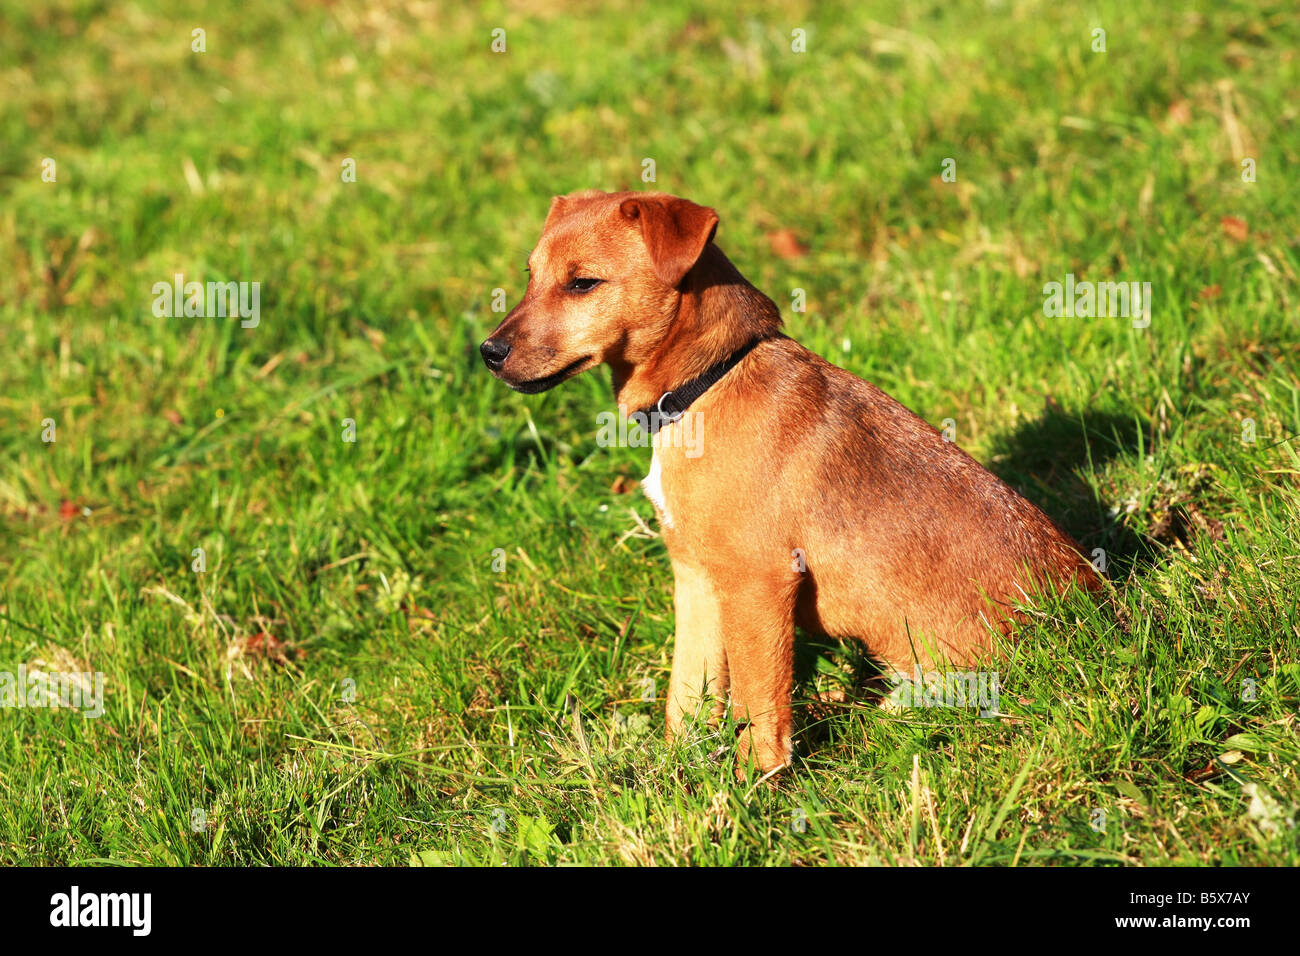 Young Patterdale Jack Russell Cross Puppy Dog Sitting In Sunny Grassy Stock Photo Alamy